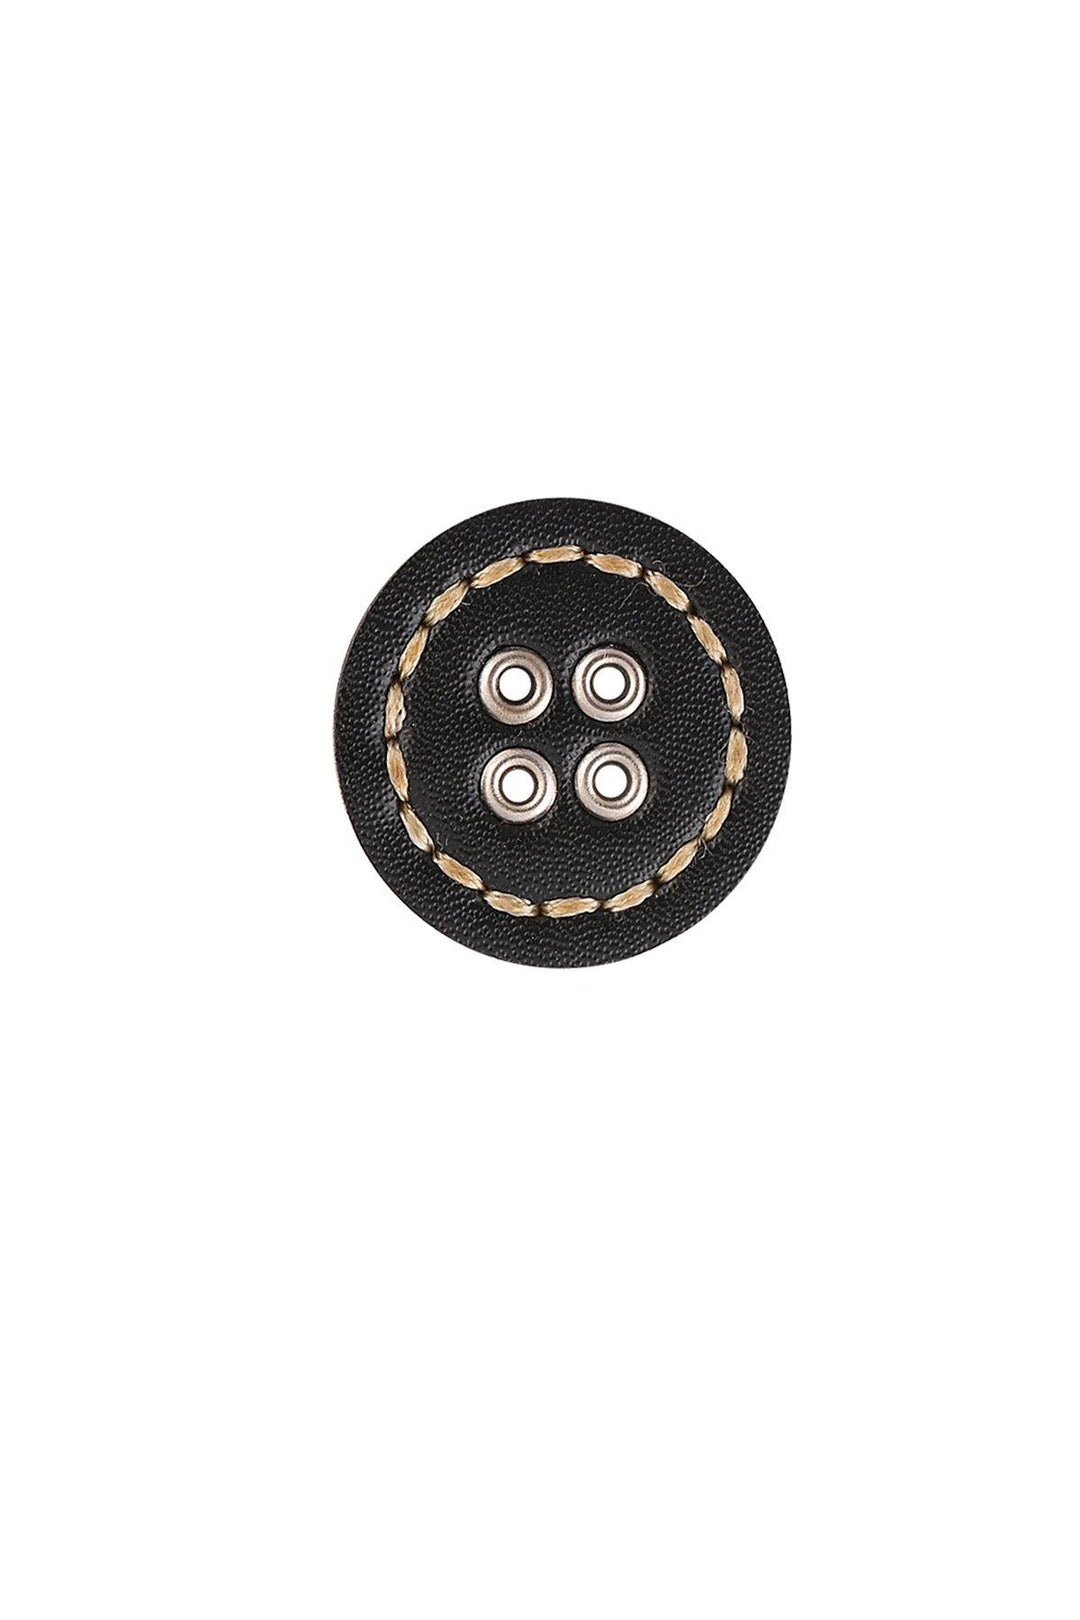 Black & Brown 4 Eyelet Hole Stitched Leather Button